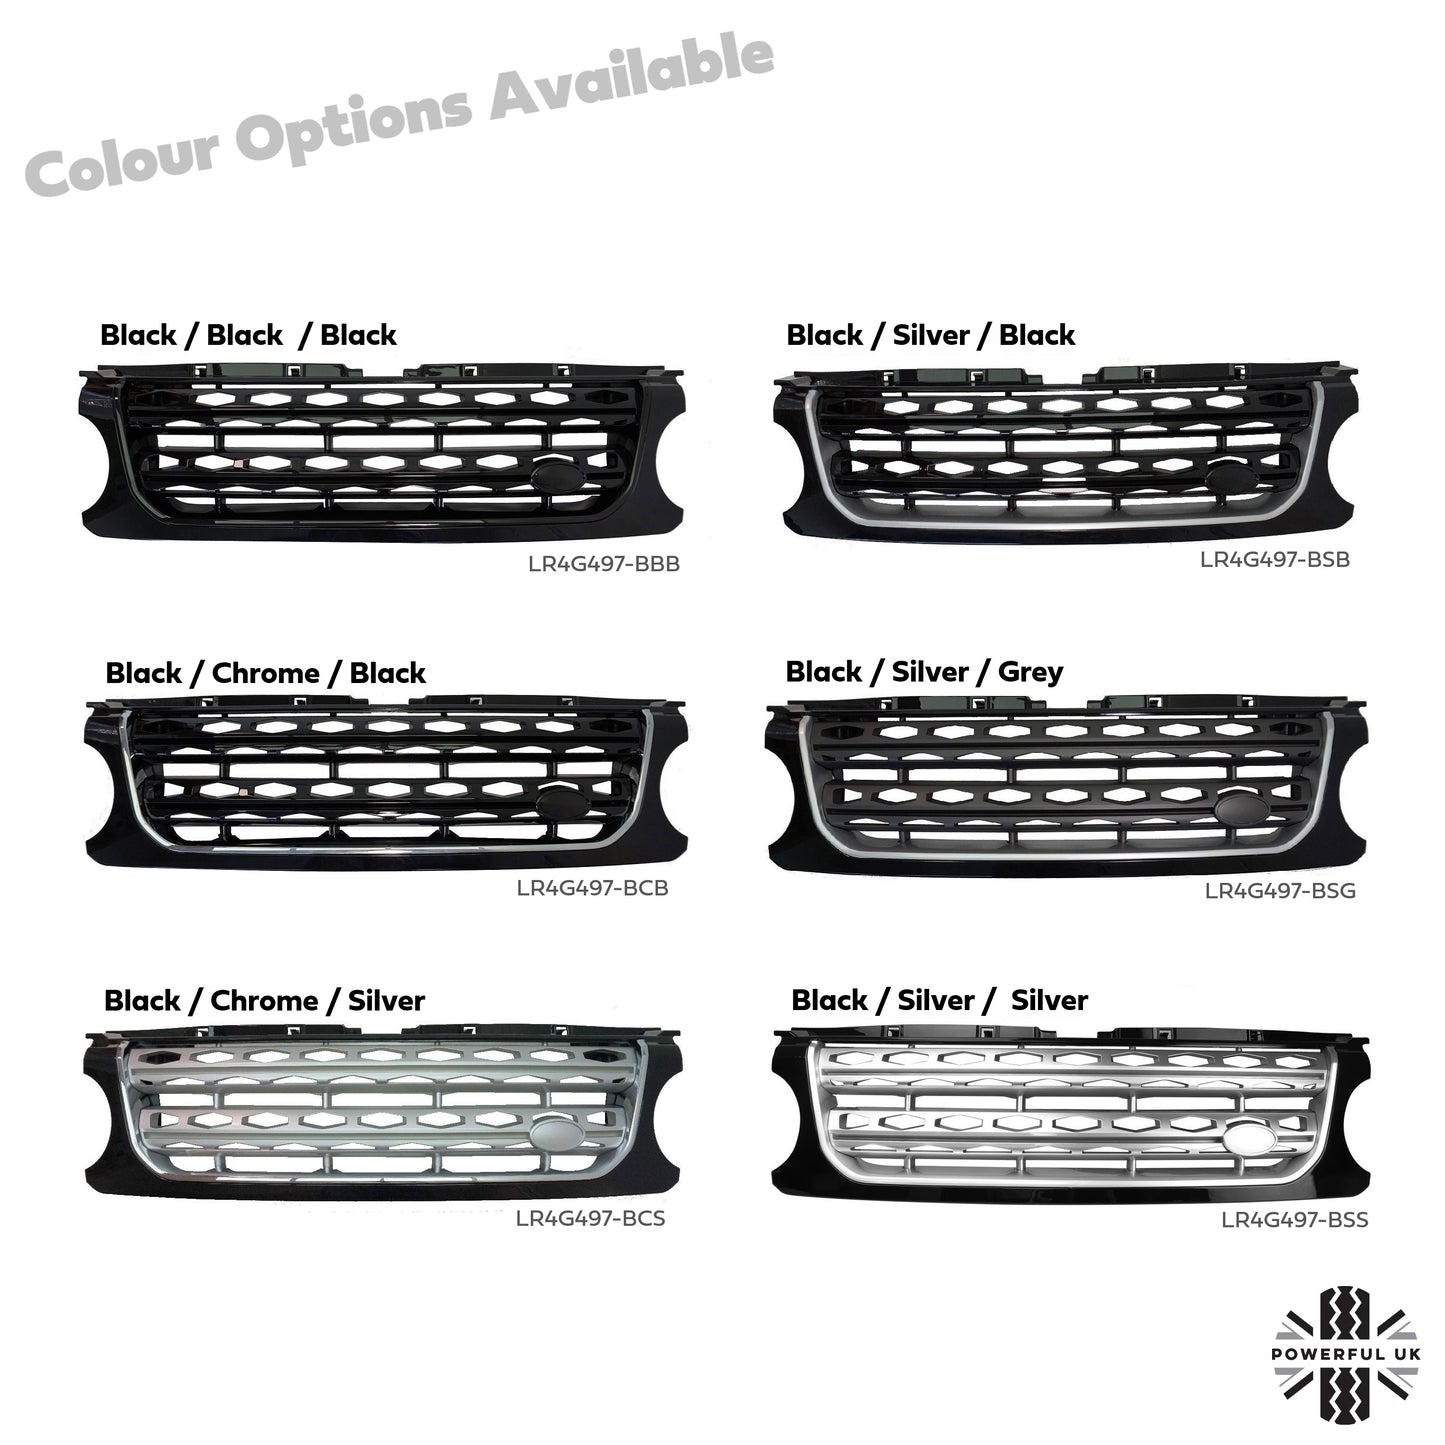 Front Grille "facelift look" - Black / Silver Black - for early Land Rover Discovery 4